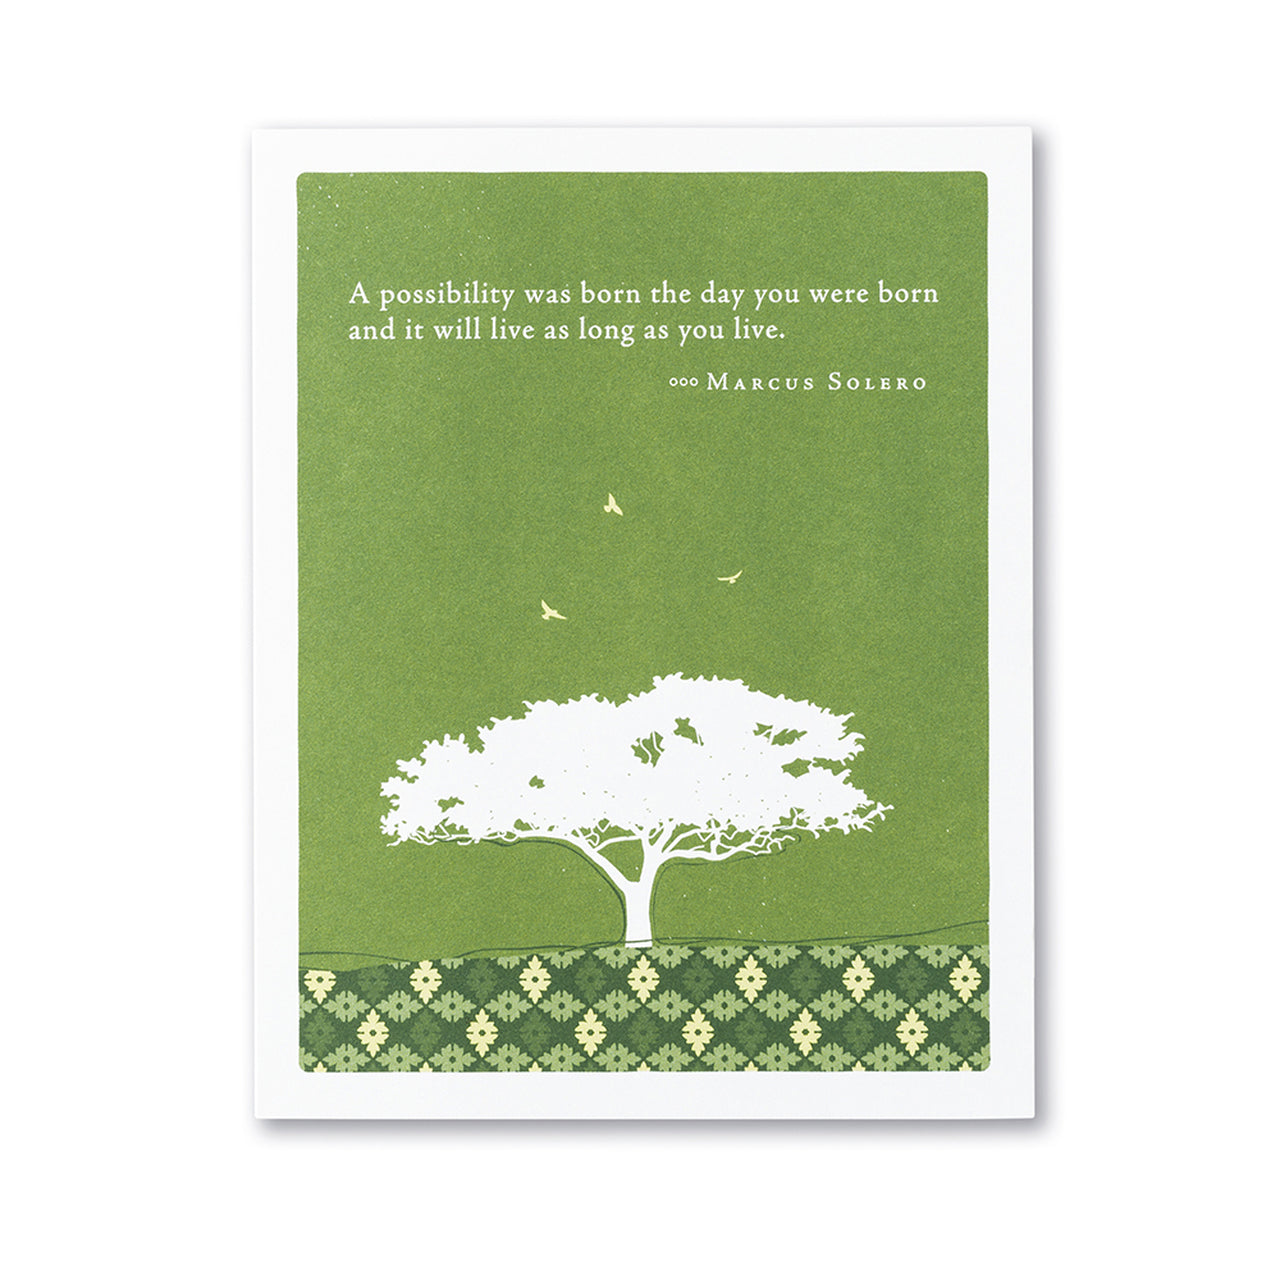 front card is a tree with birds flying and text